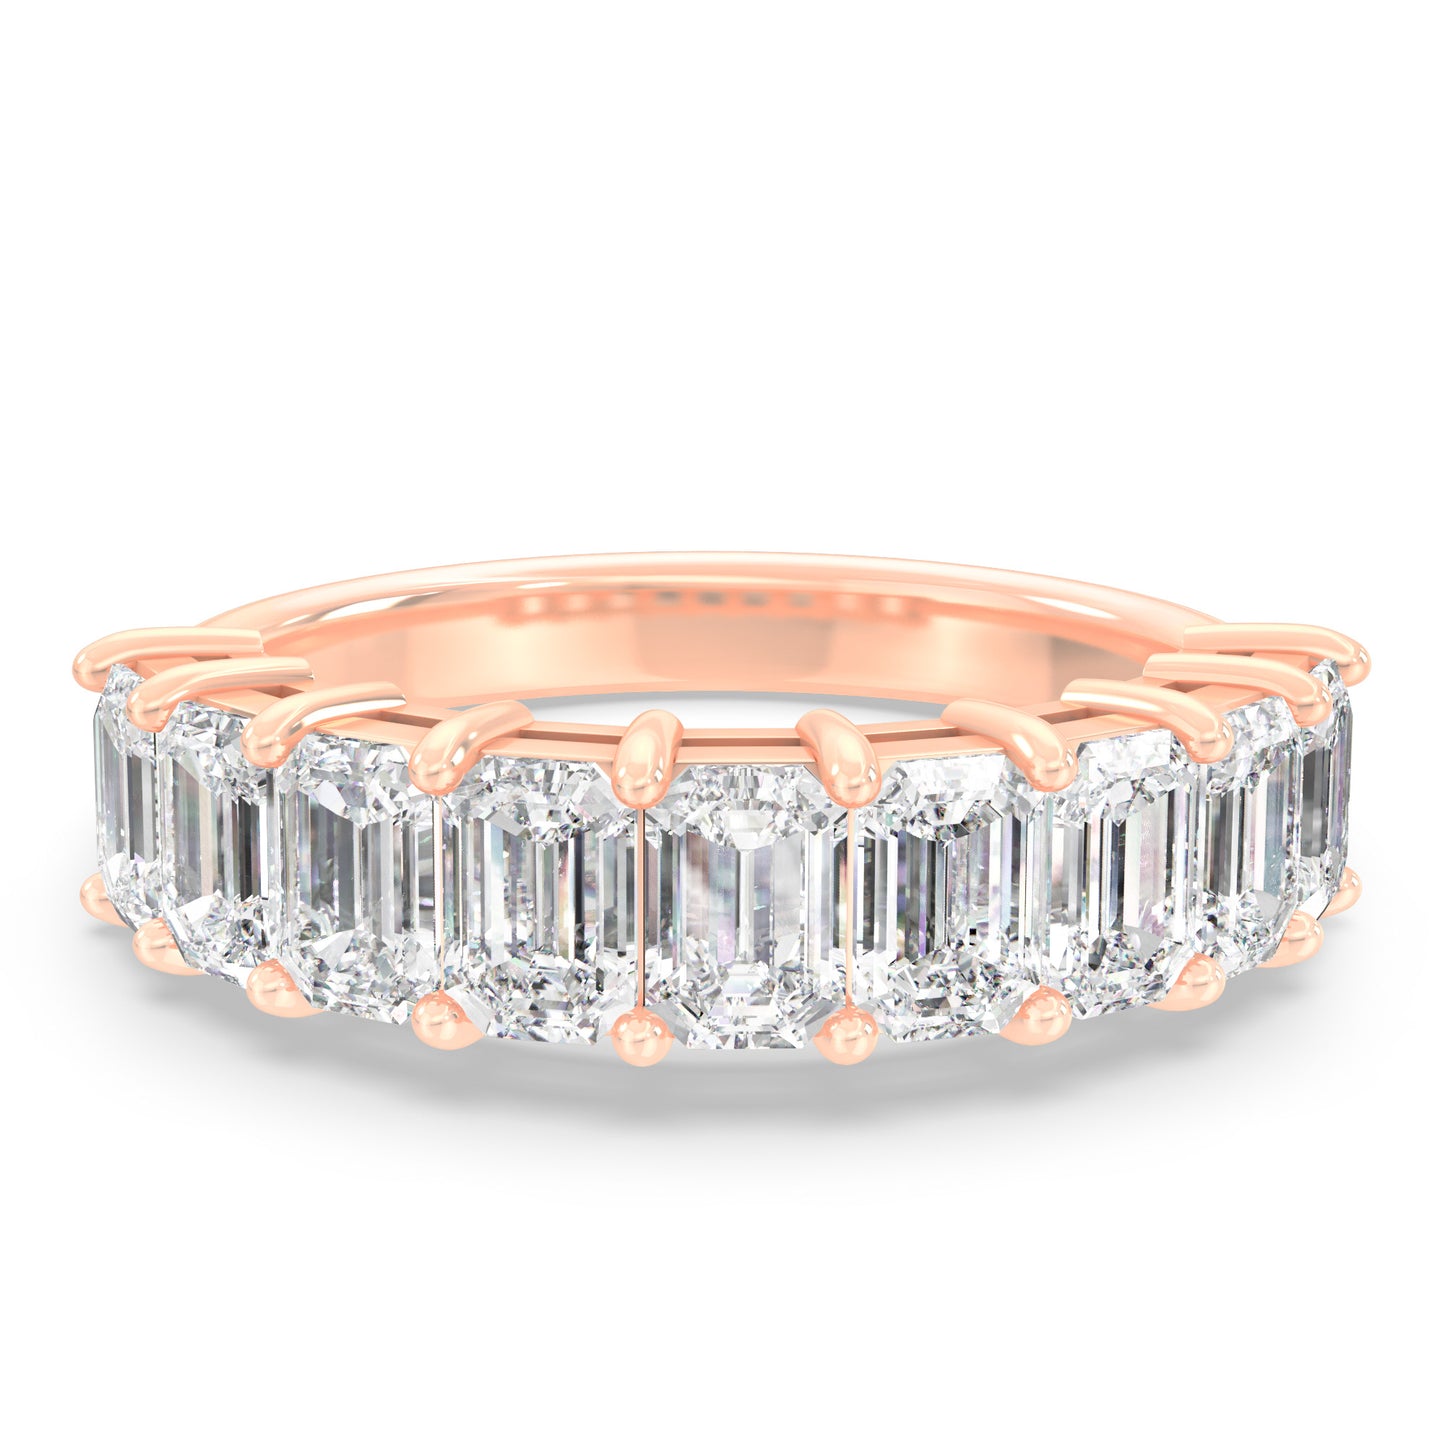 0.20ct Emerald Cut Lab Grown Diamonds Anniversary Ring <Affordable>